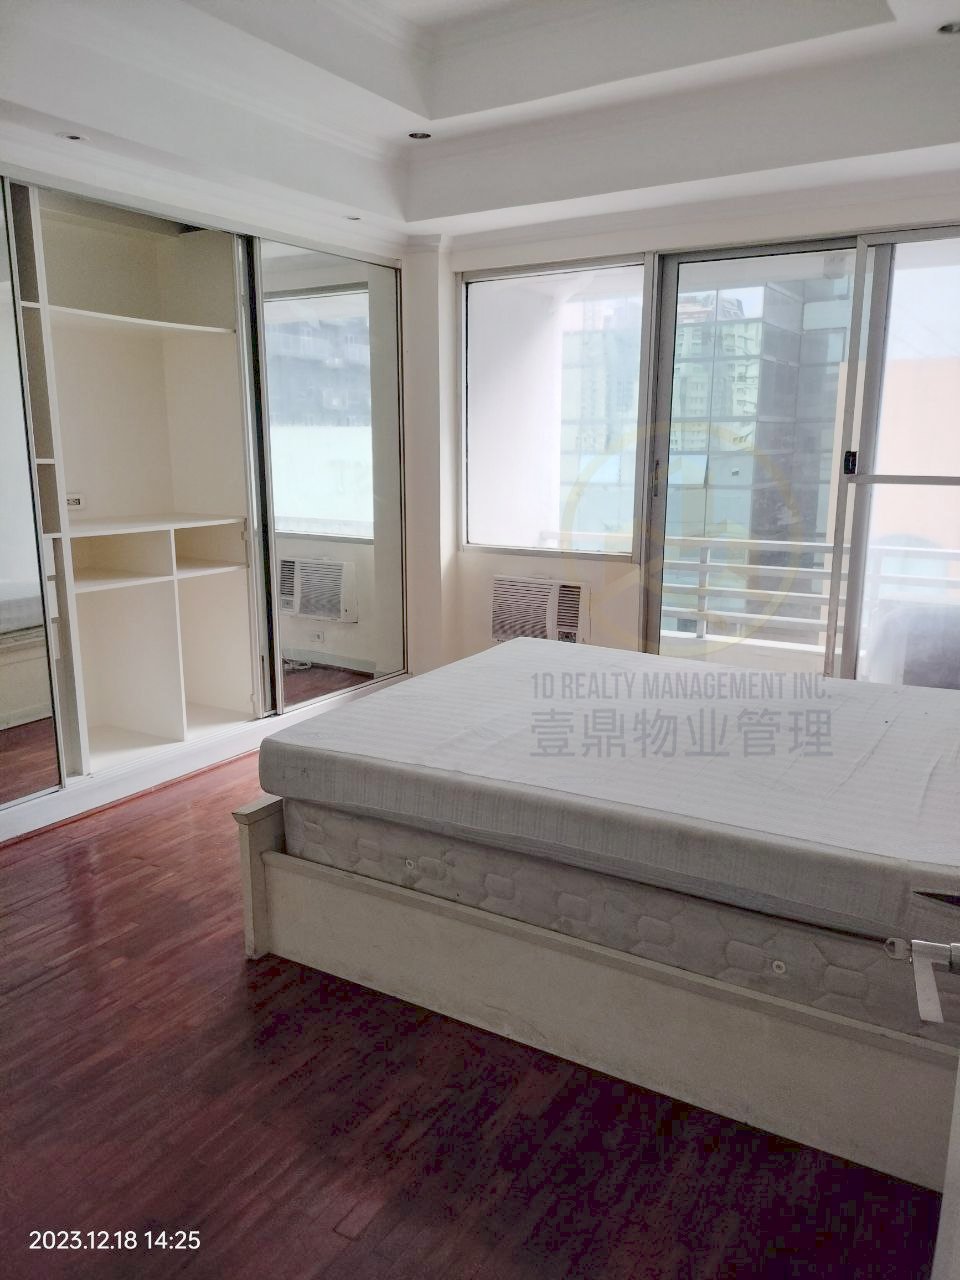 FOR SALE 2BR - EASTON PLACE - Salcedo Village Makati City